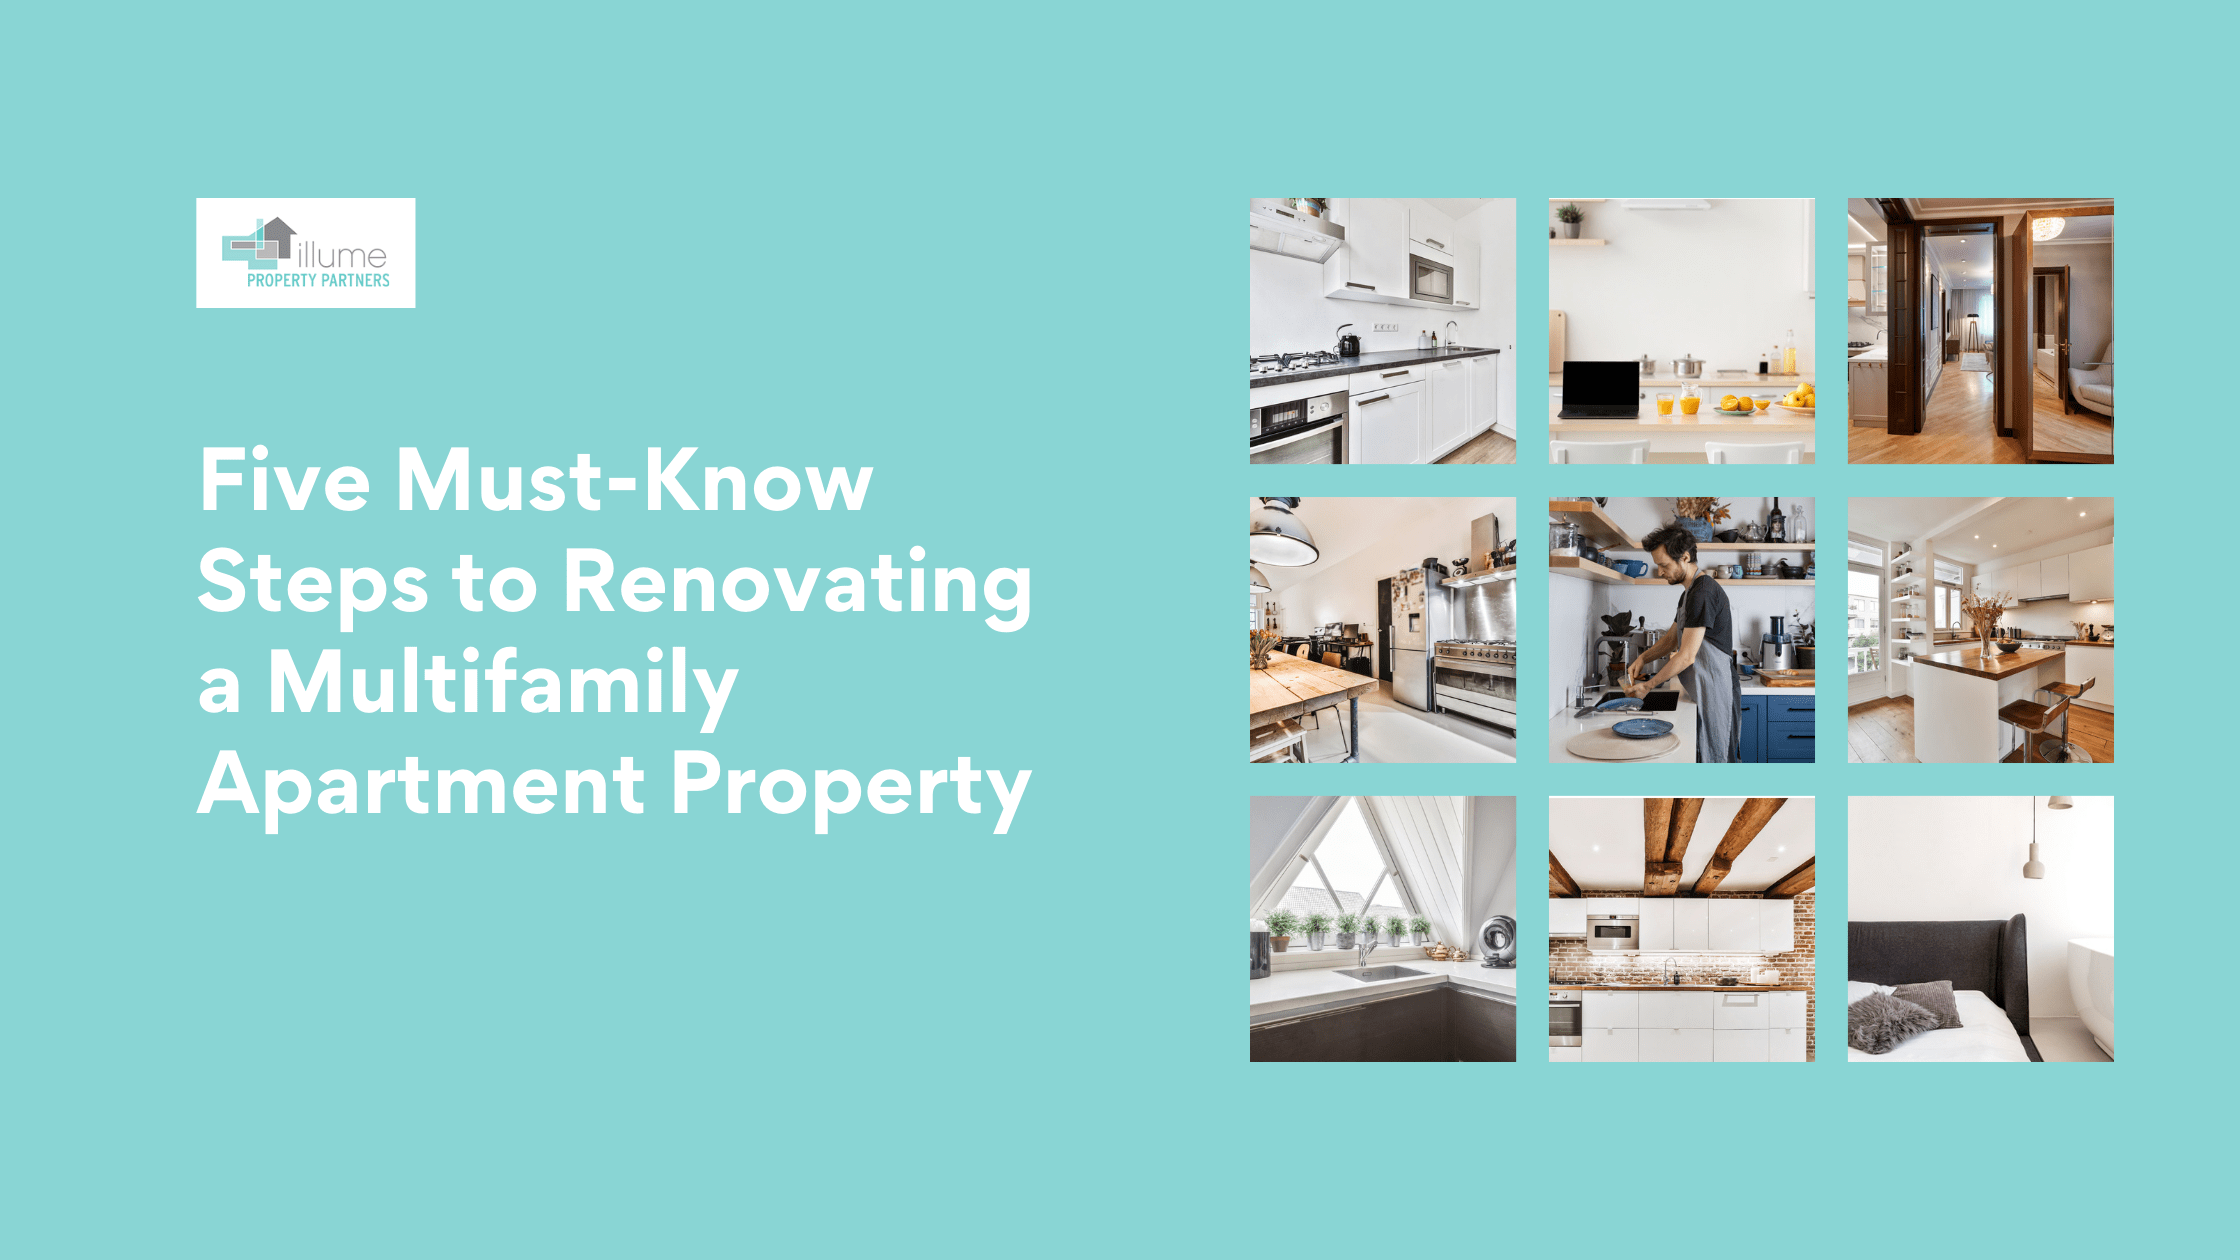 Five Must-Know Steps to Renovating a Multifamily Apartment Property